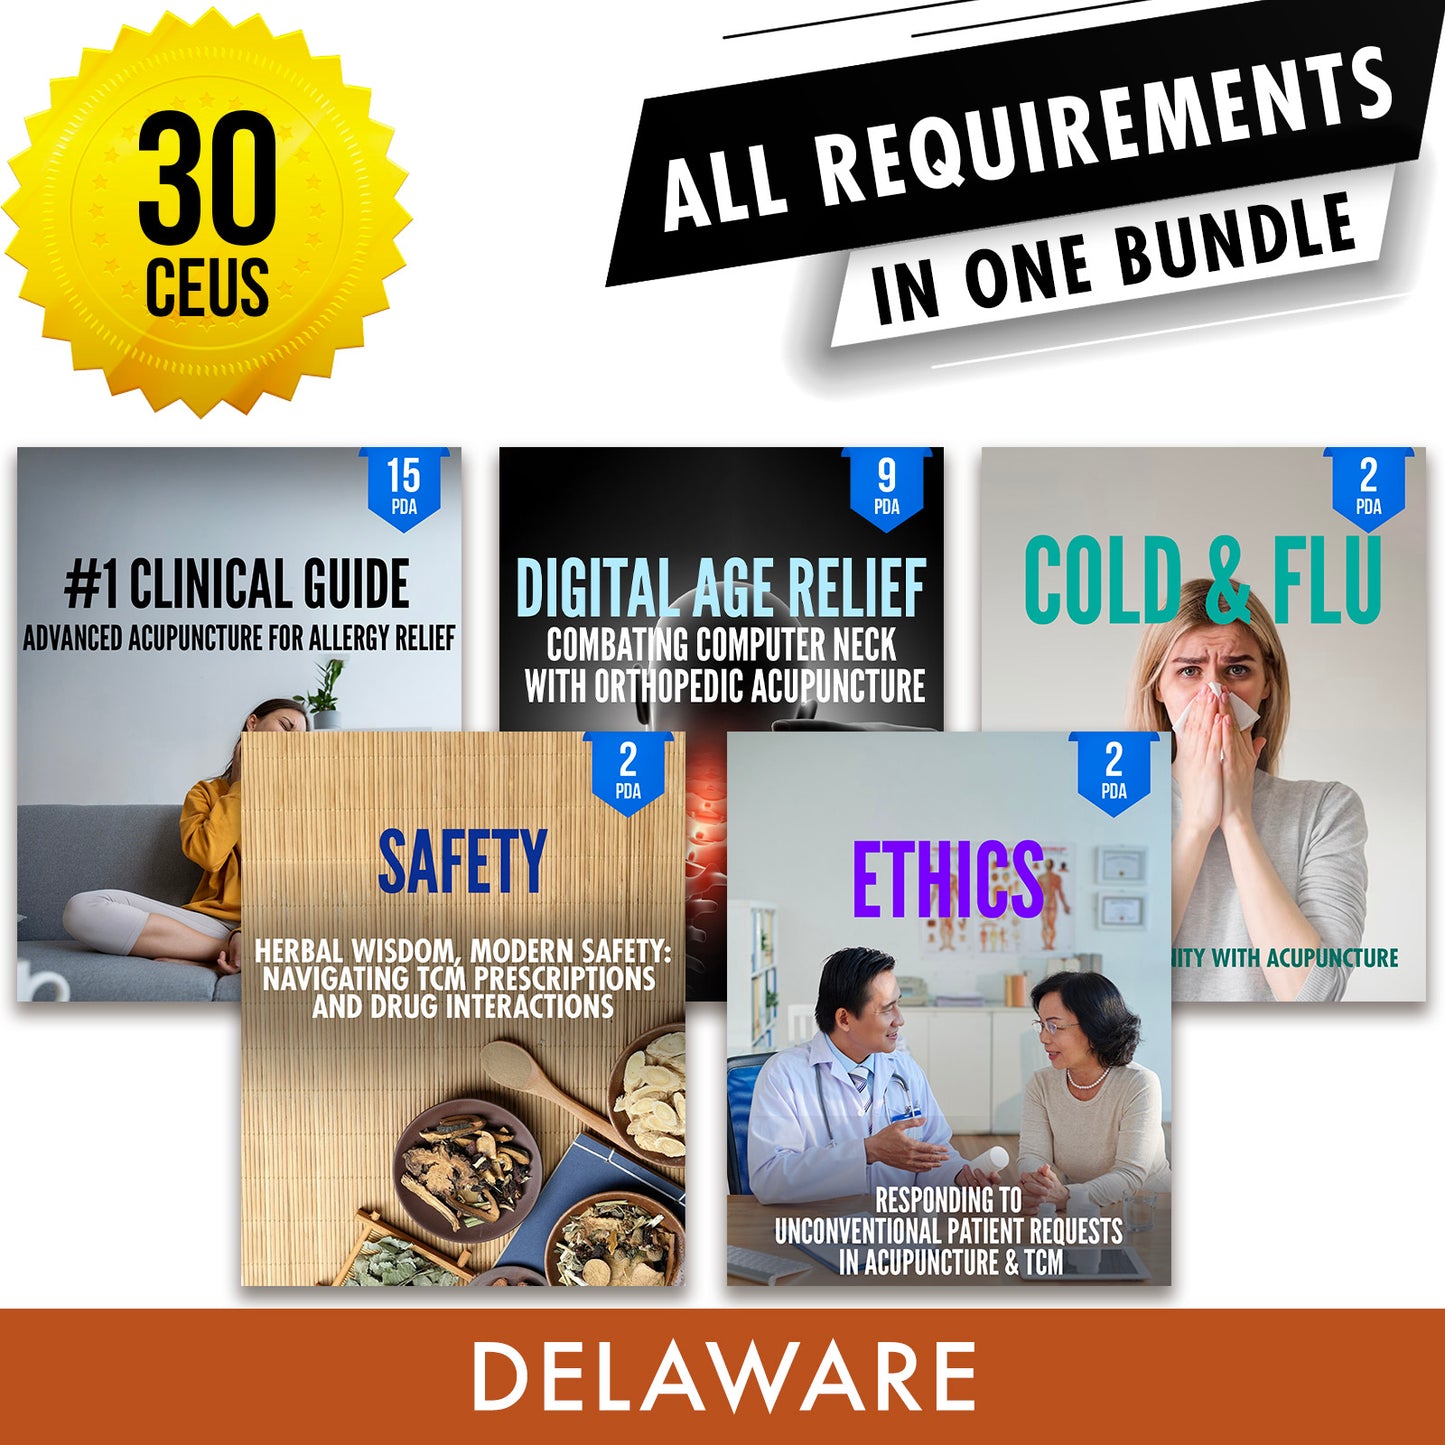 Delaware Bundle 2: Full Recertification - All Required Acupuncture Continuing Education Credits in One Package, 30 PDA/CEU Hours ACEU Masters continuing education florida california nccaom australia uk canada